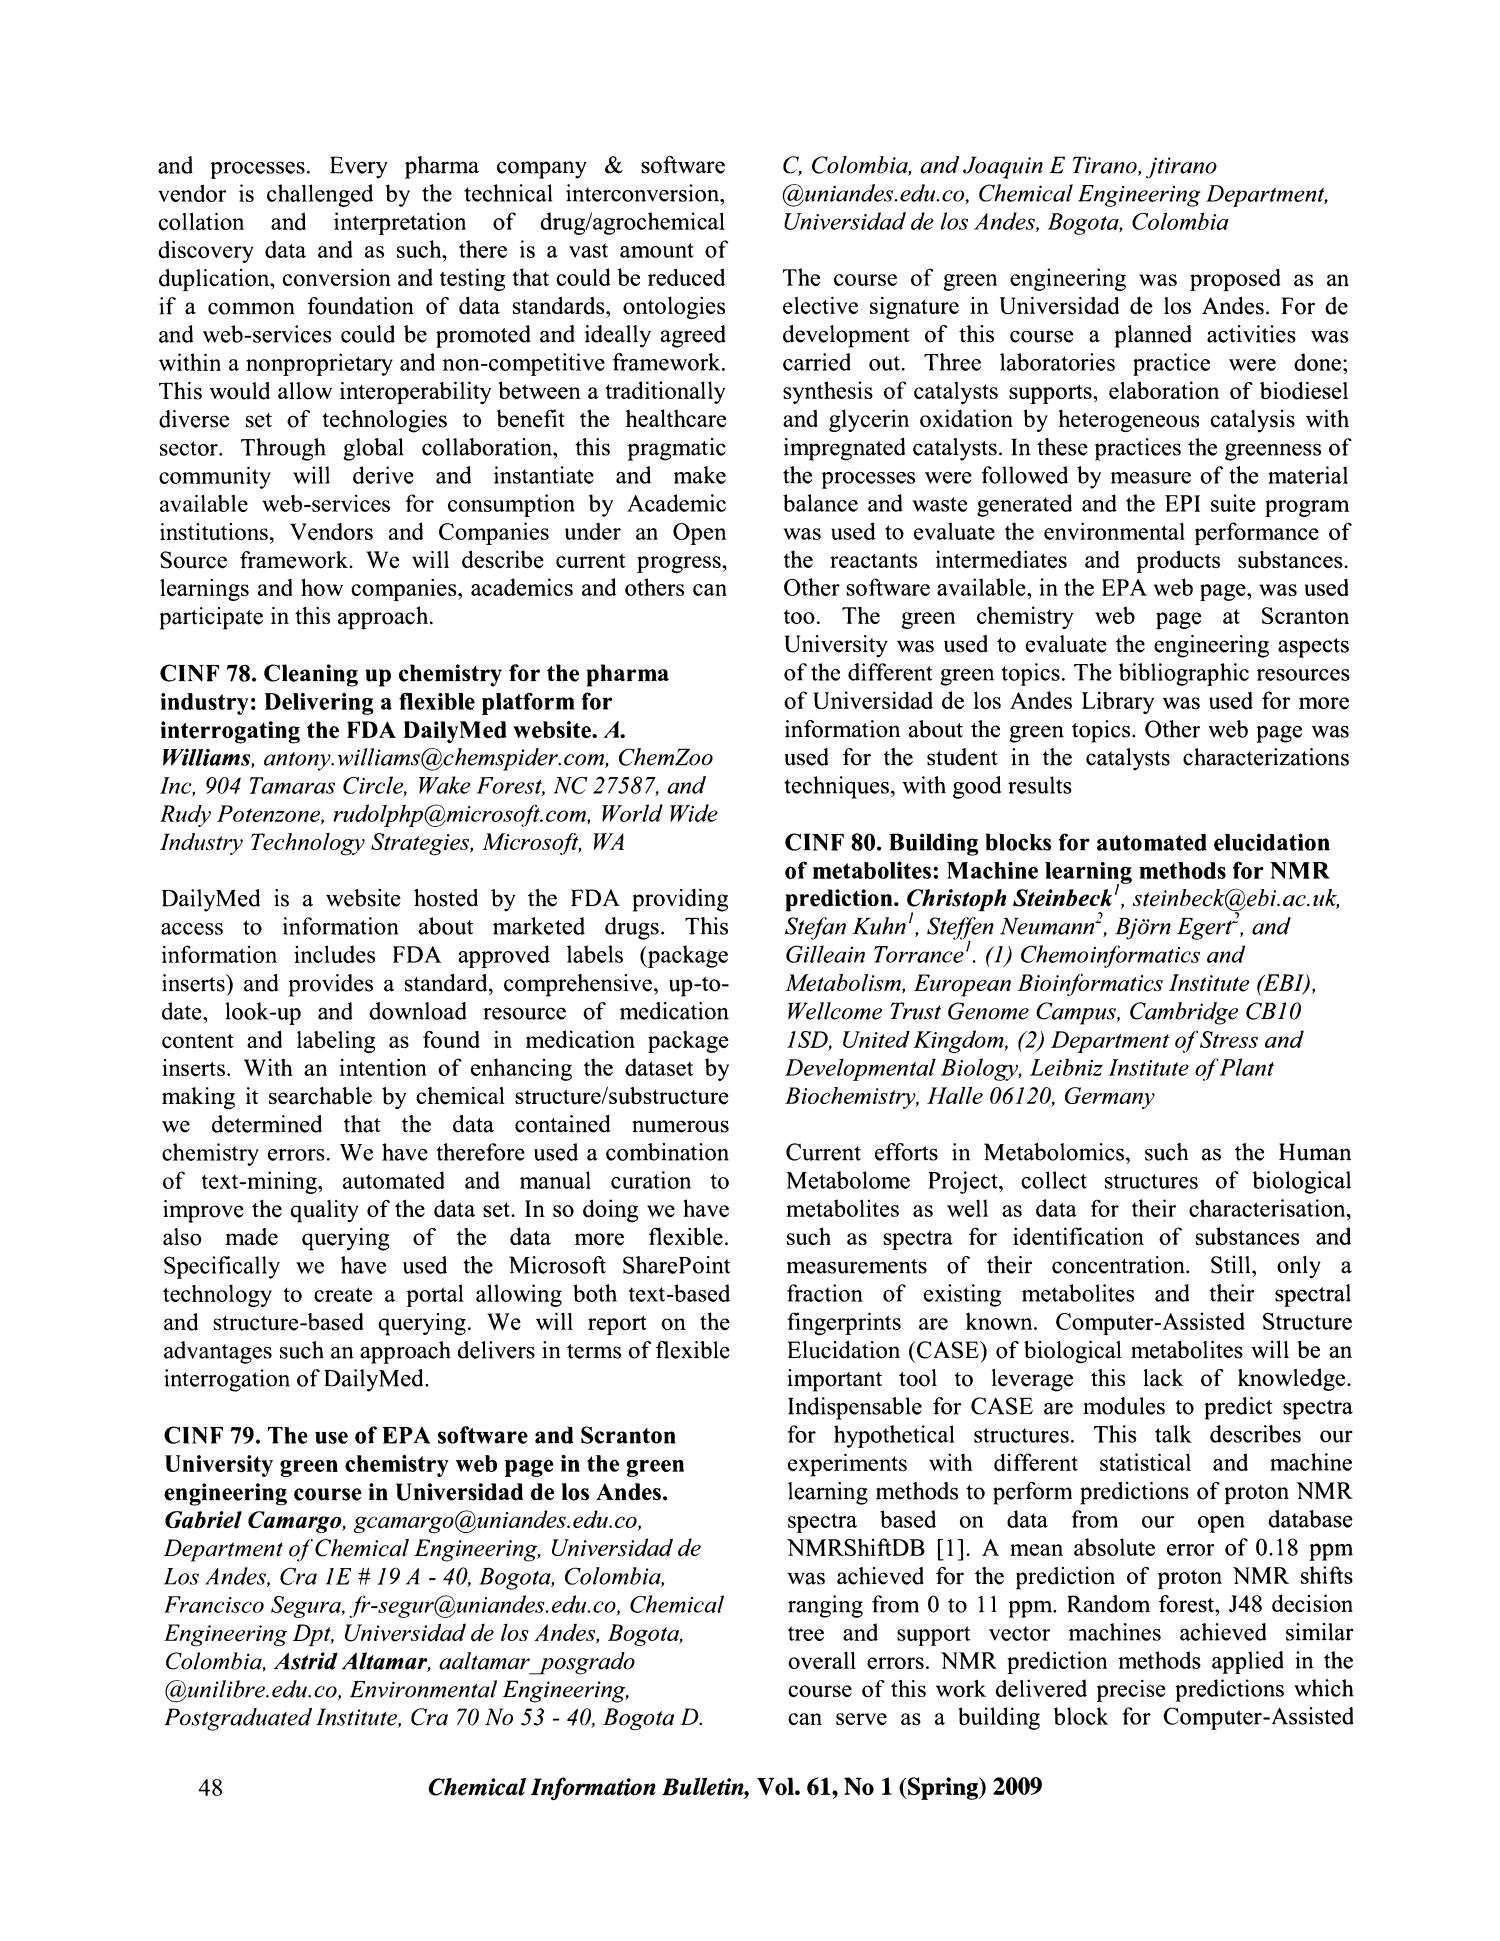 Chemical Information Bulletin, Volume 61, Number 1, Spring 2009
                                                
                                                    [Sequence #]: 50 of 56
                                                